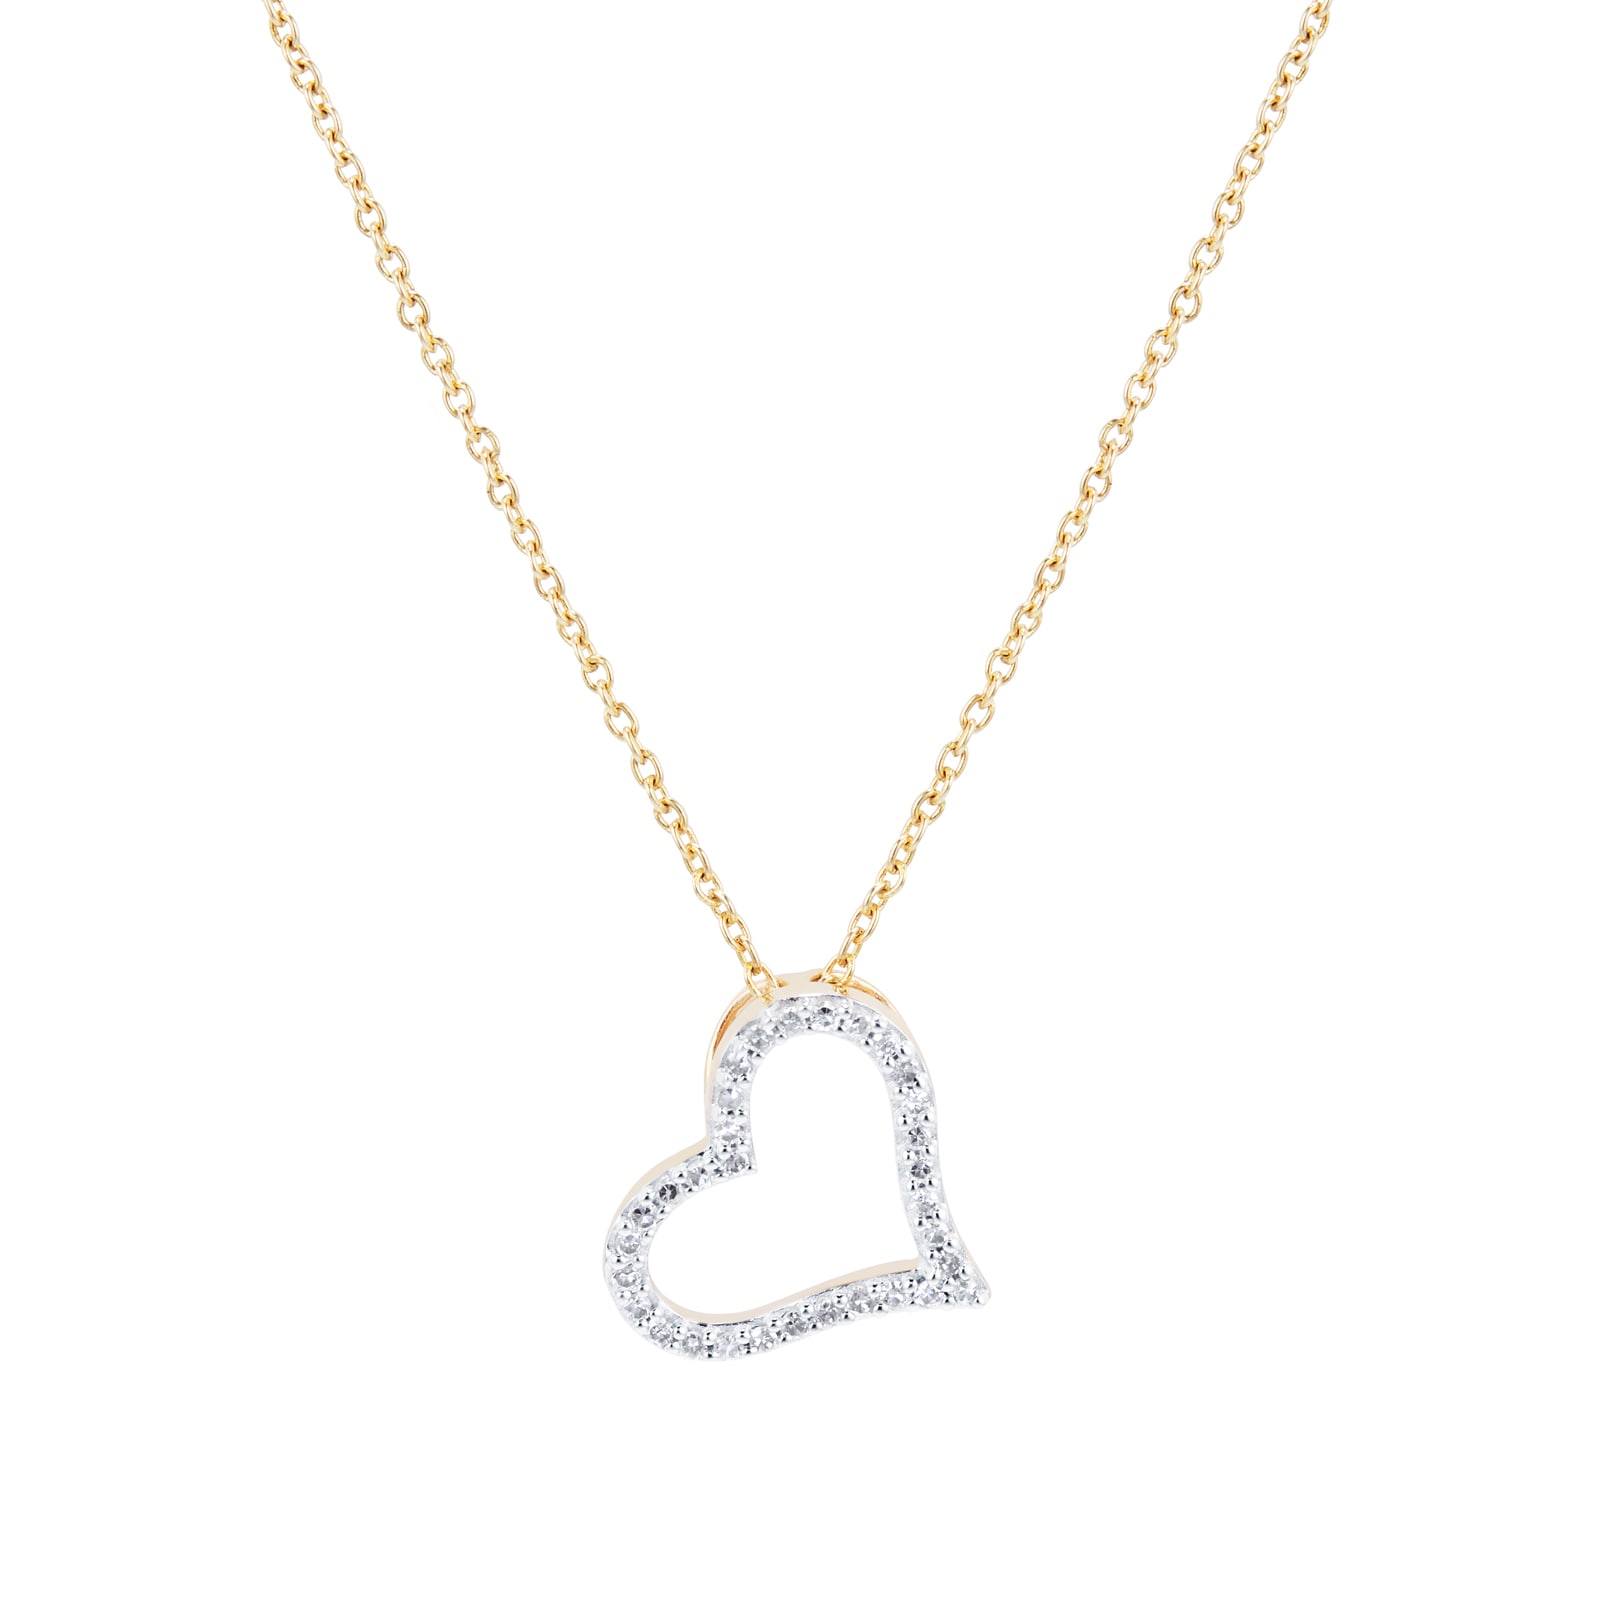 Warren James Jewellers - 󾔐 A classic Christmas gift for a loved one. Store  your most precious photo's in this stunning Real Sterling Silver heart  locket #silver #locket #necklace #christmasgift #love #sterlingsilver